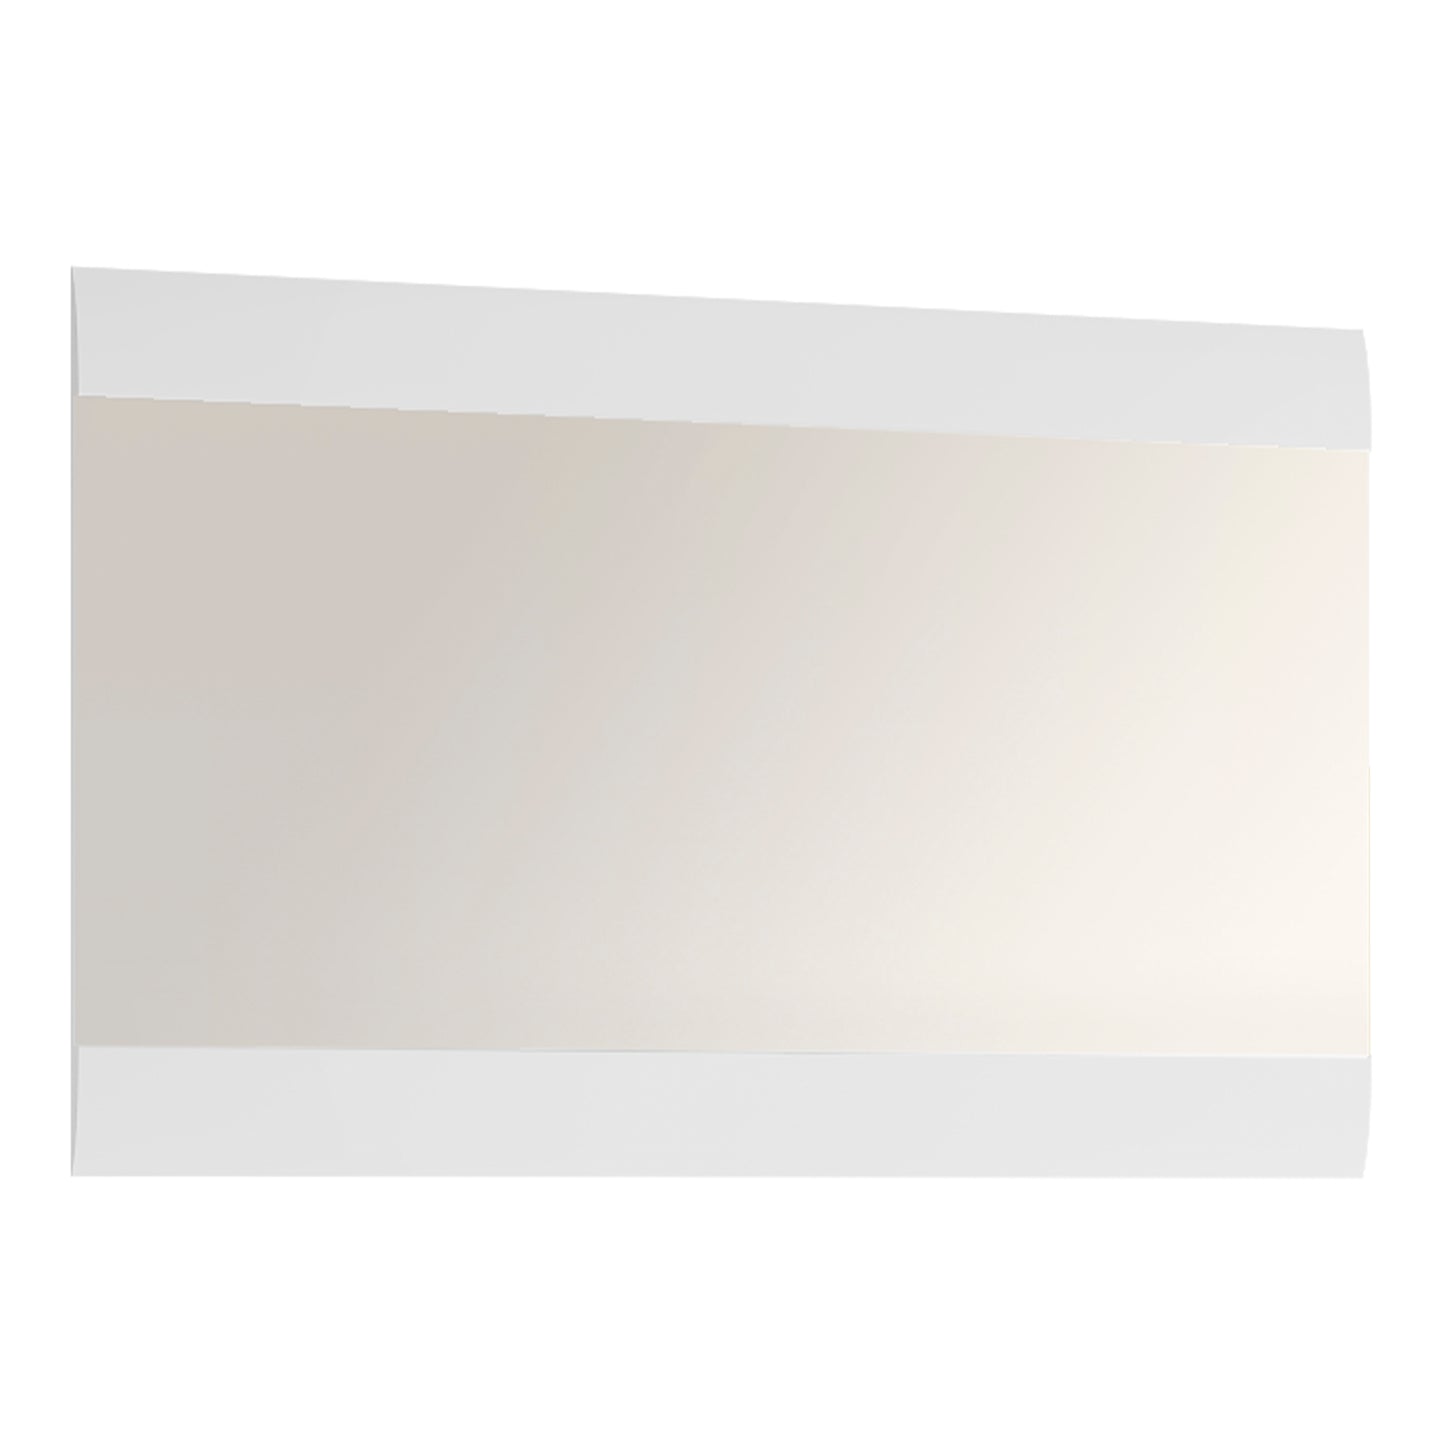 Chelsea  Wall Mirror 109.5 cm wide in White with Oak Trim